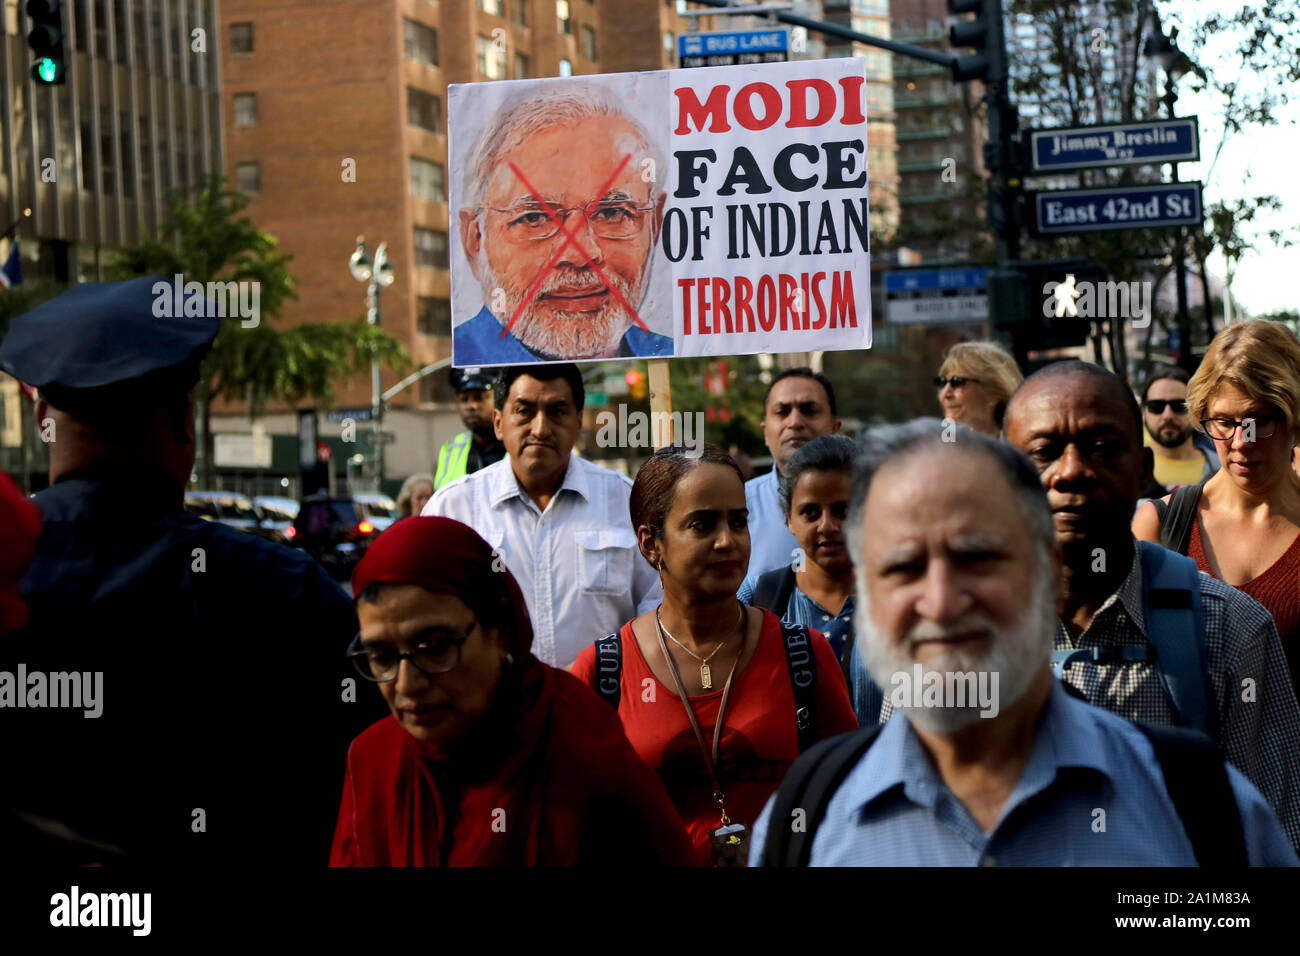 New York City, New York, USA. 27th Sep, 2019. Thousands of Friends of Kashmir protested the Indian government policies and actions towards Kashmir on the last day of the United Nation General Assembly (UNGA74) at Dag HammarskjÃ¶ld Plaza in New York City on 27 Sep, 2019, to rally in support of the right of self-determination for Kashmiris and ending the occupation of the conflicted Kashmir region. Credit: G. Ronald Lopez/ZUMA Wire/Alamy Live News Stock Photo